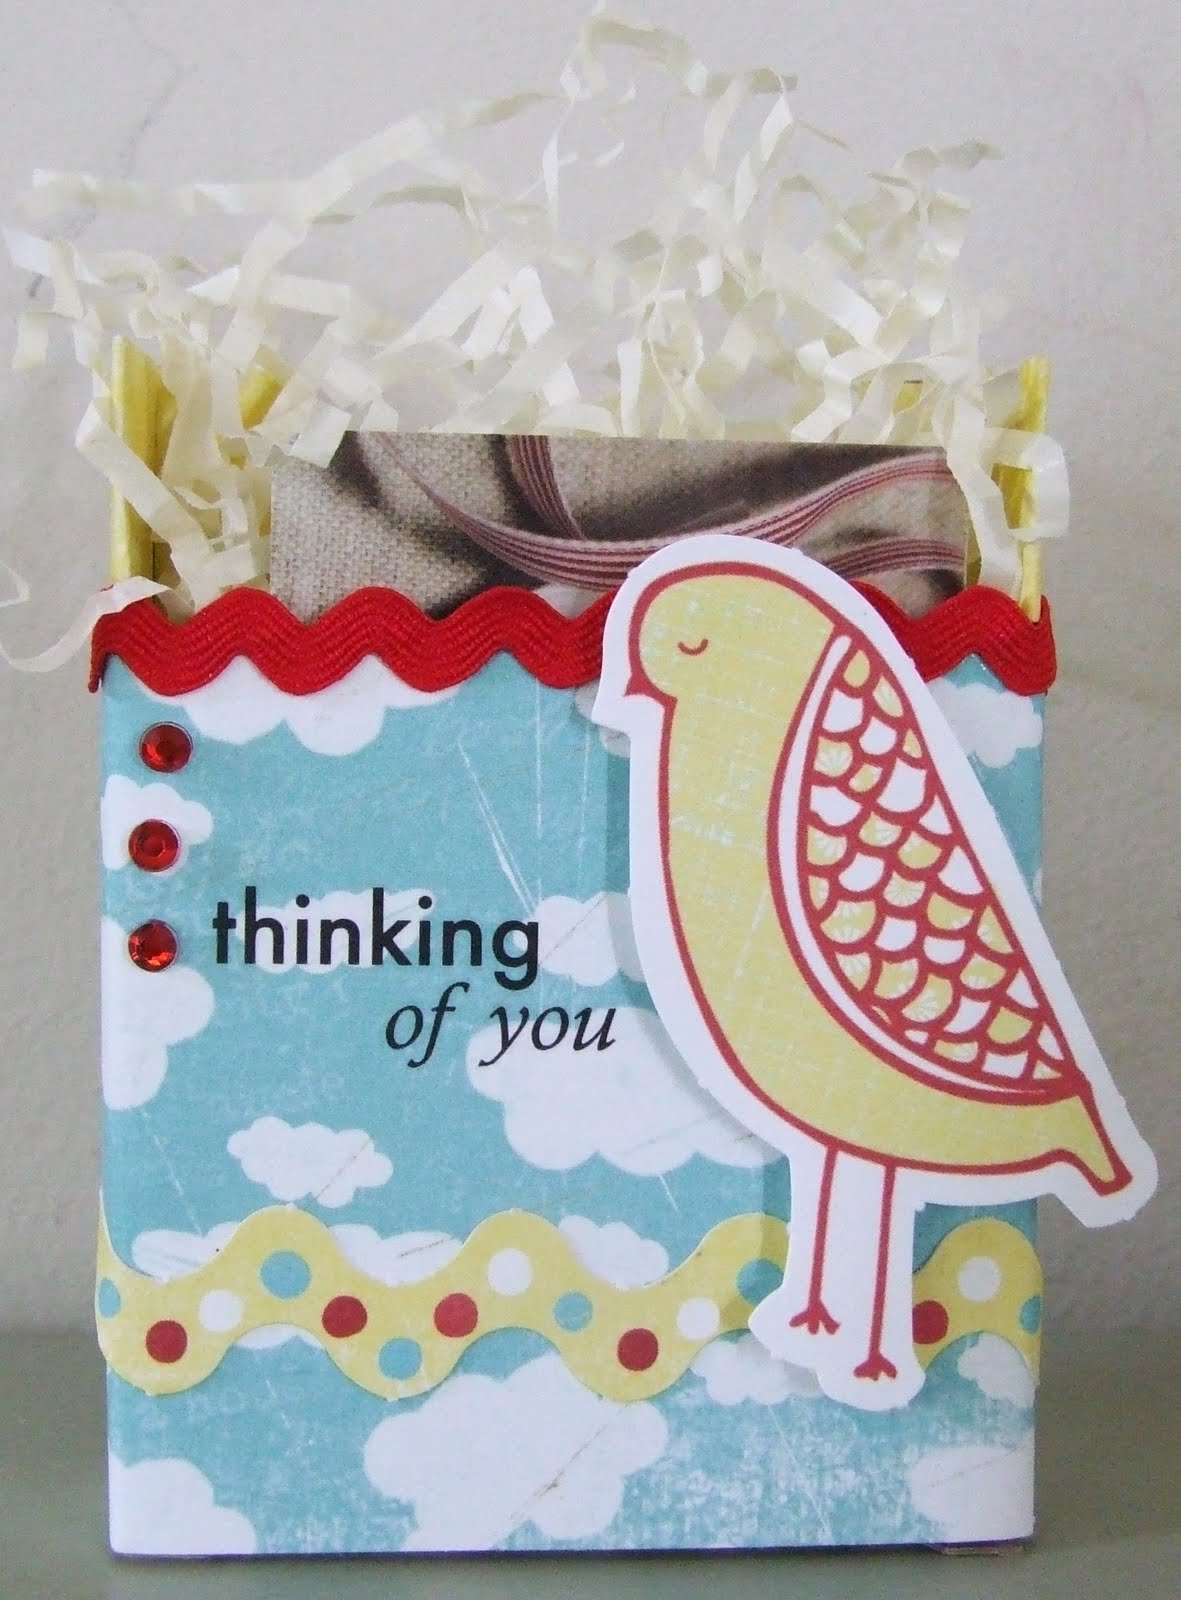 [thinking+of+you+with+gift+card+by+Amy+Duff.JPG]